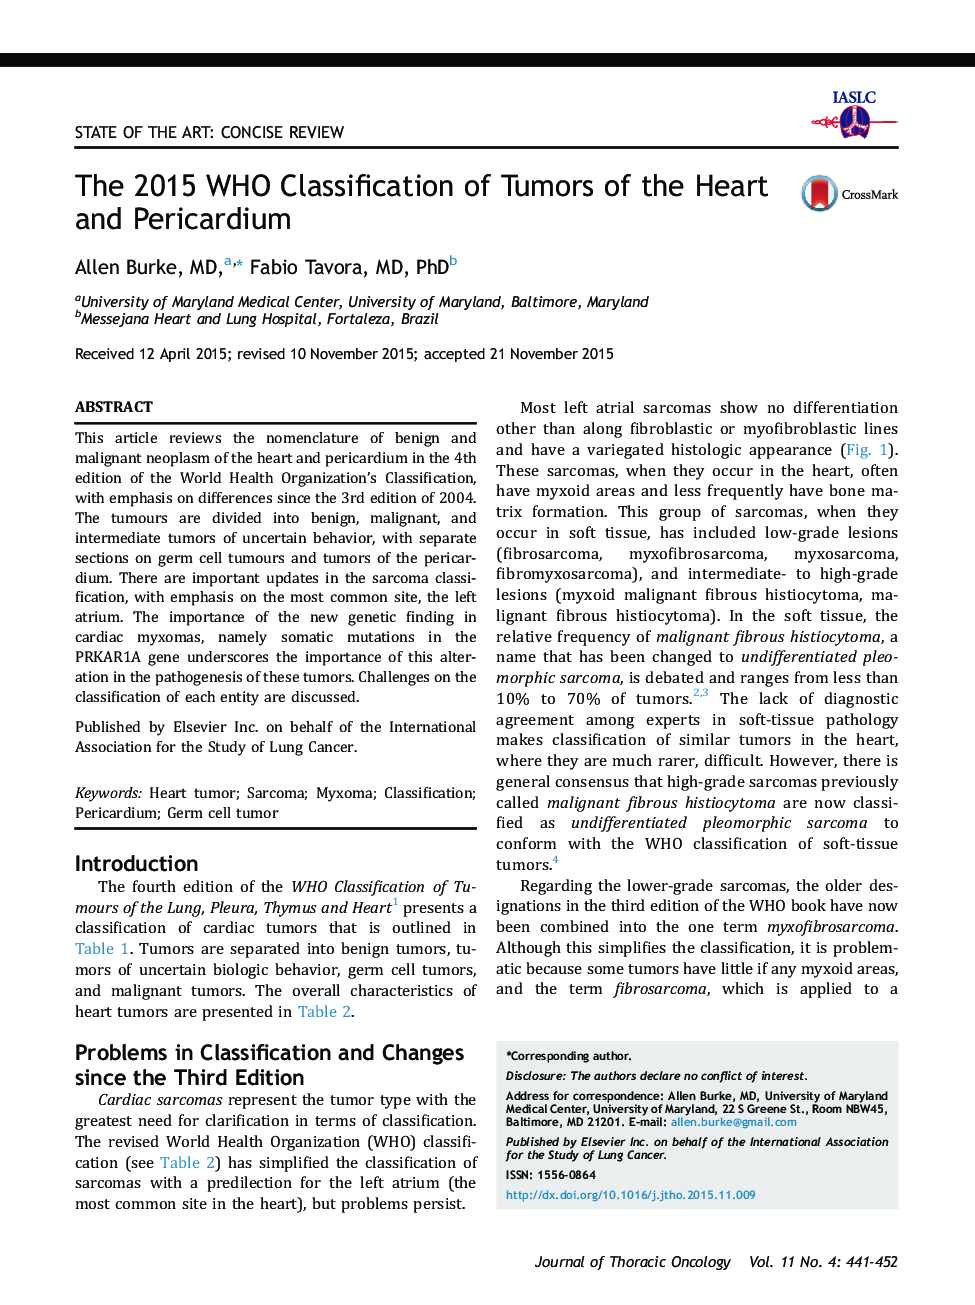 The 2015 WHO Classification of Tumors of the Heart and Pericardium